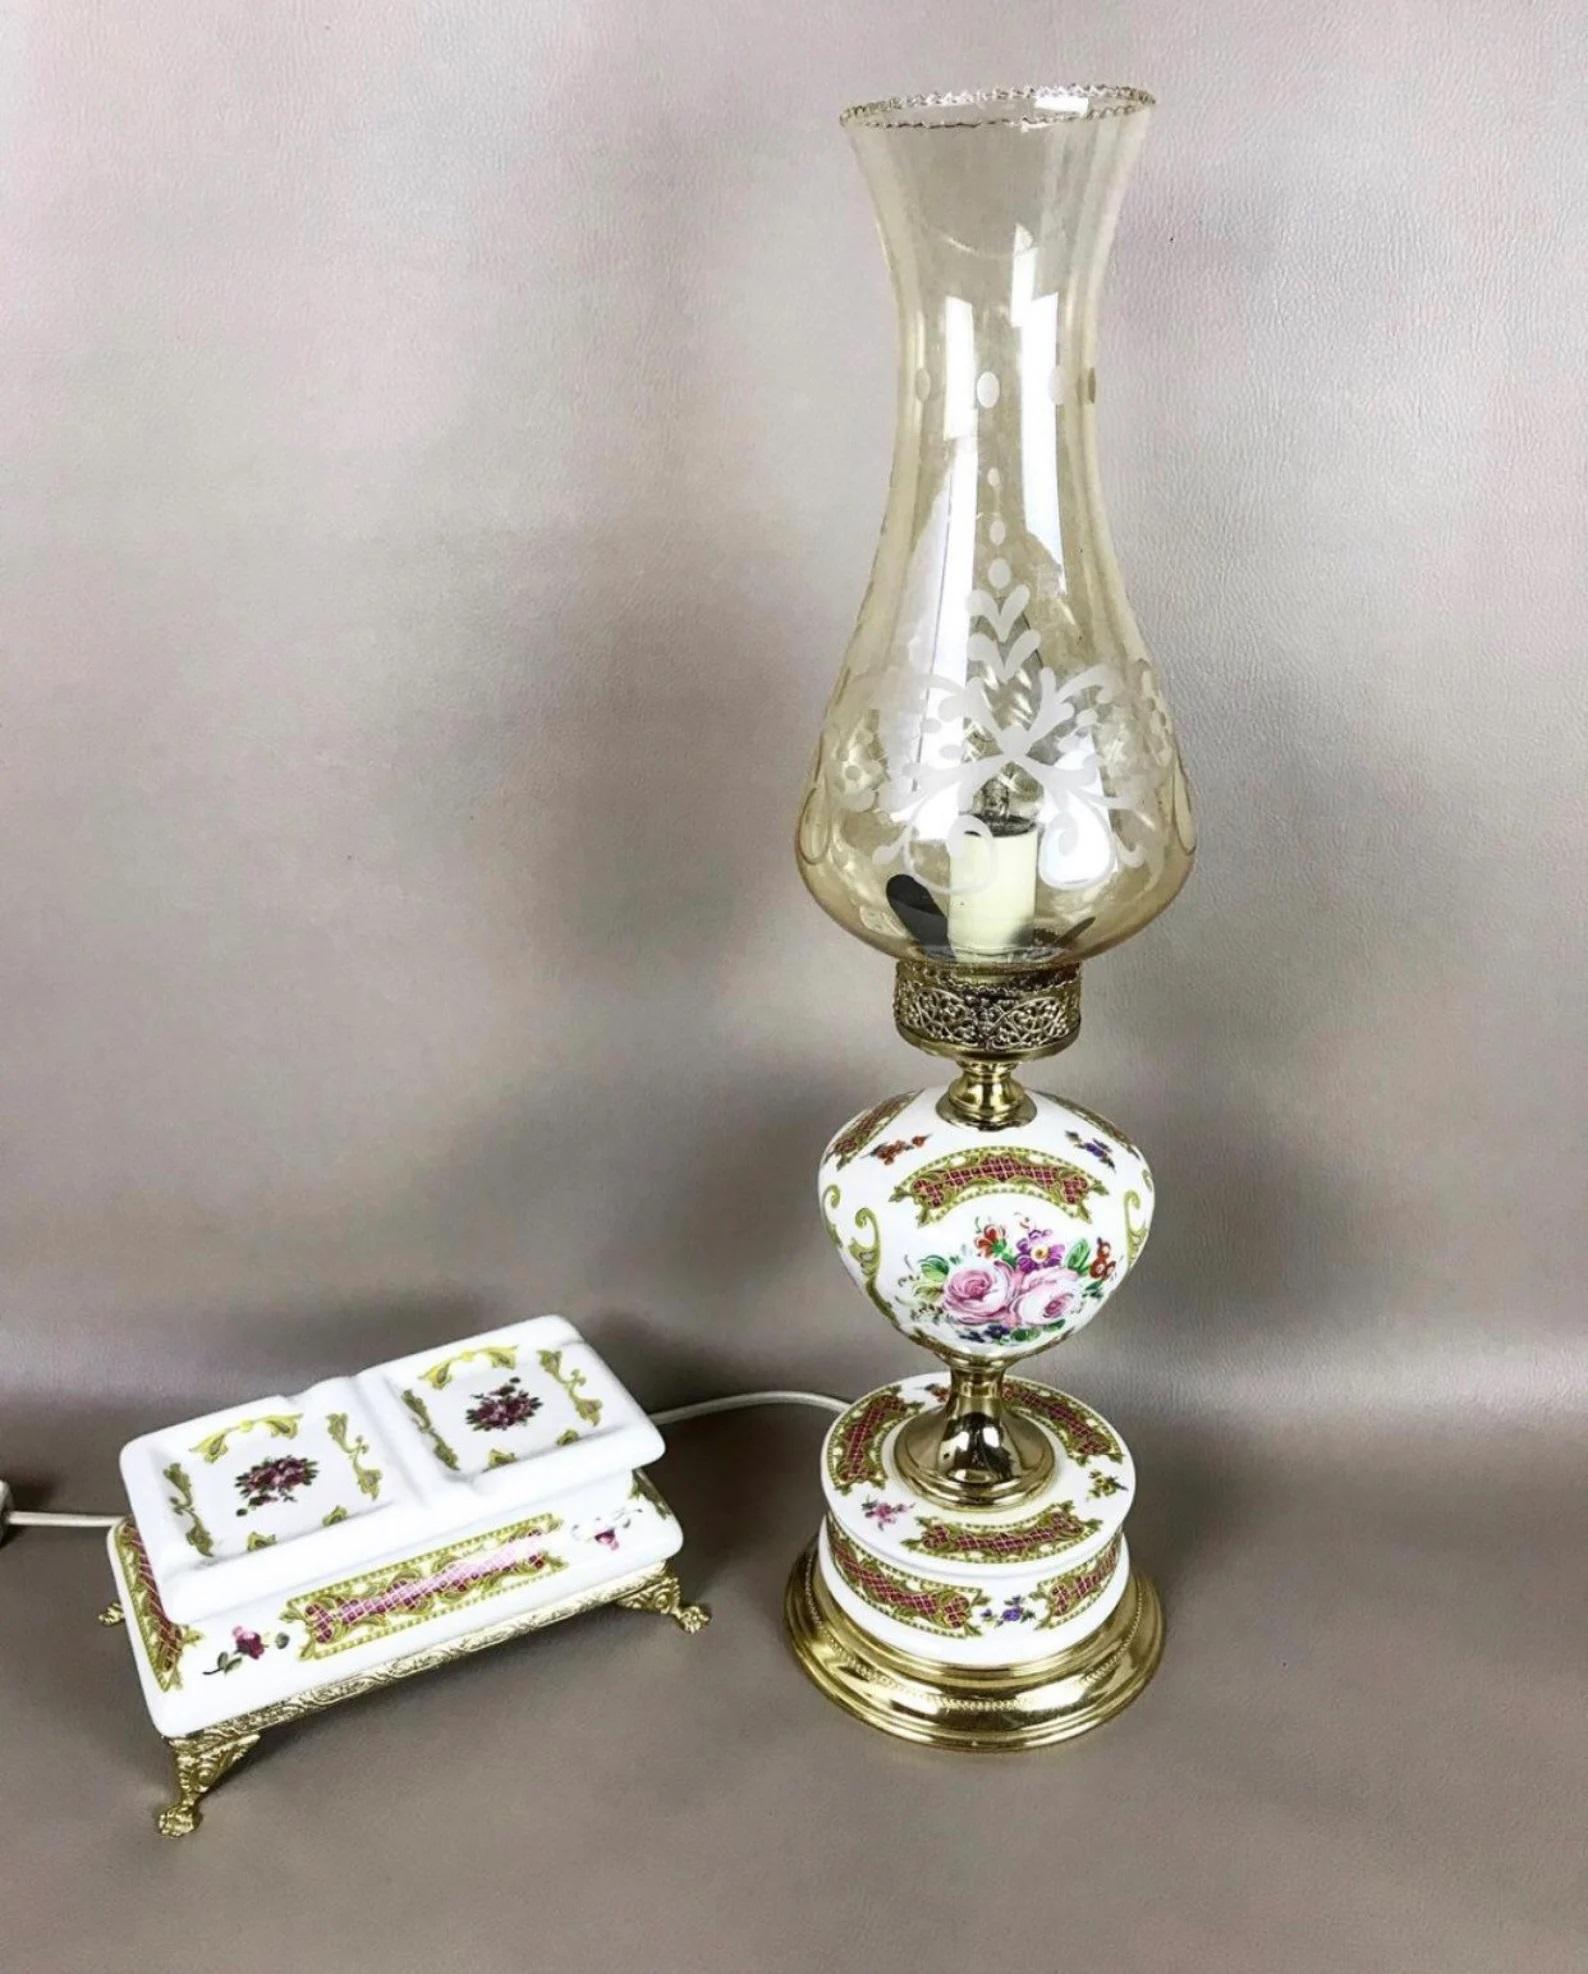 Vintage elegant table lamp and jewelry box from the Italian brand Alfa Ceramiche.

Great design and great quality!

The lamp is in perfect condition, the jewelry box has small chips on the inner surface.

Size:

Height: 19.6 inch 50